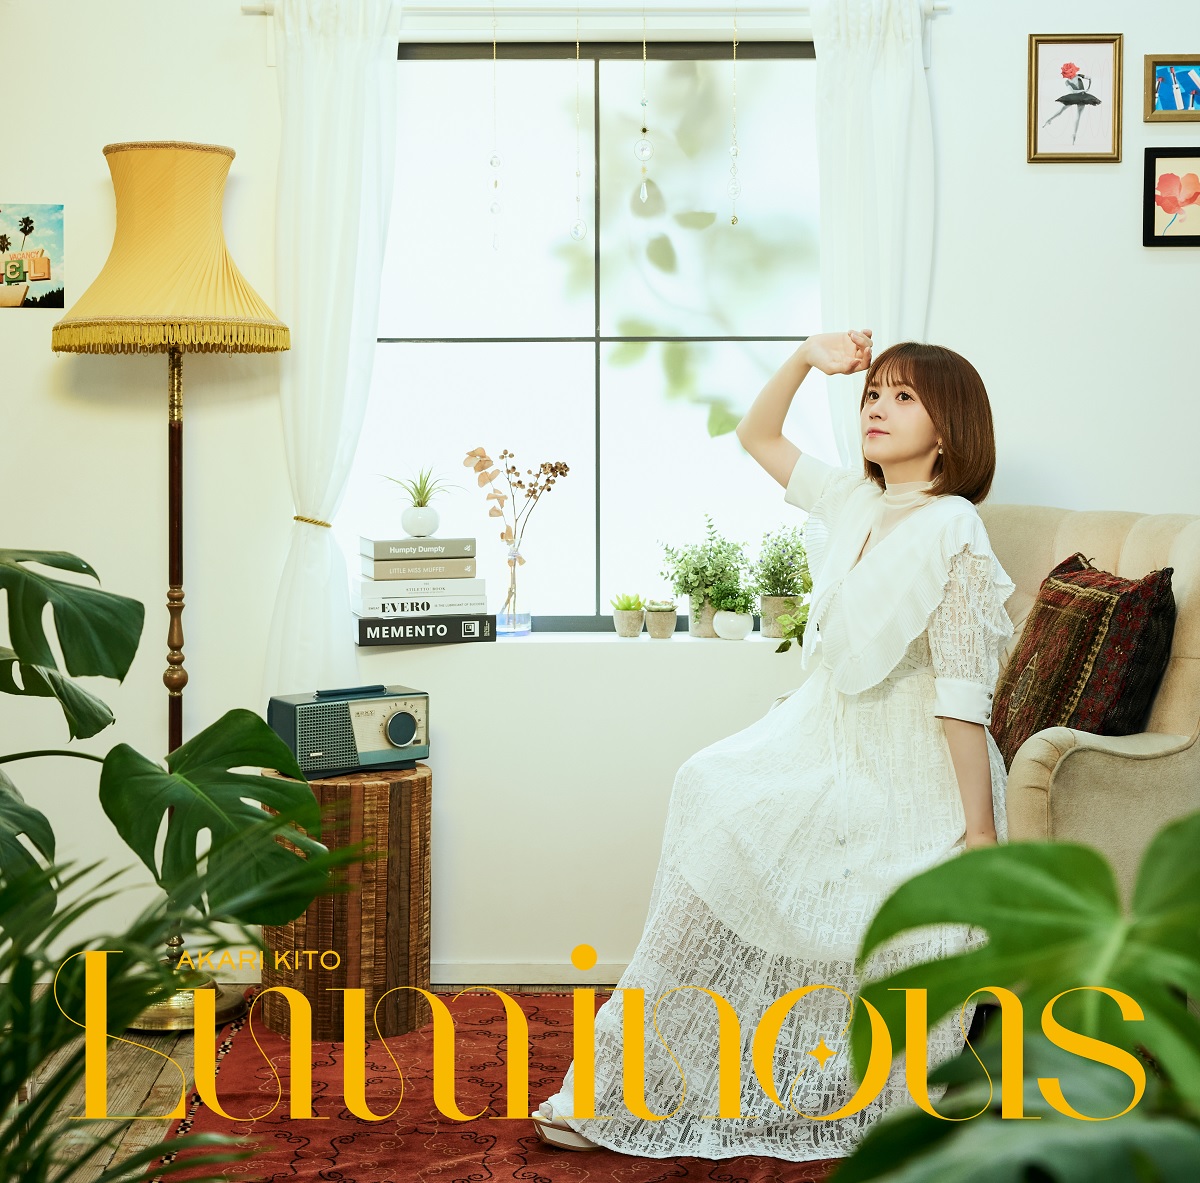 Cover art for『Akari Kito - Esquisse』from the release『Luminous